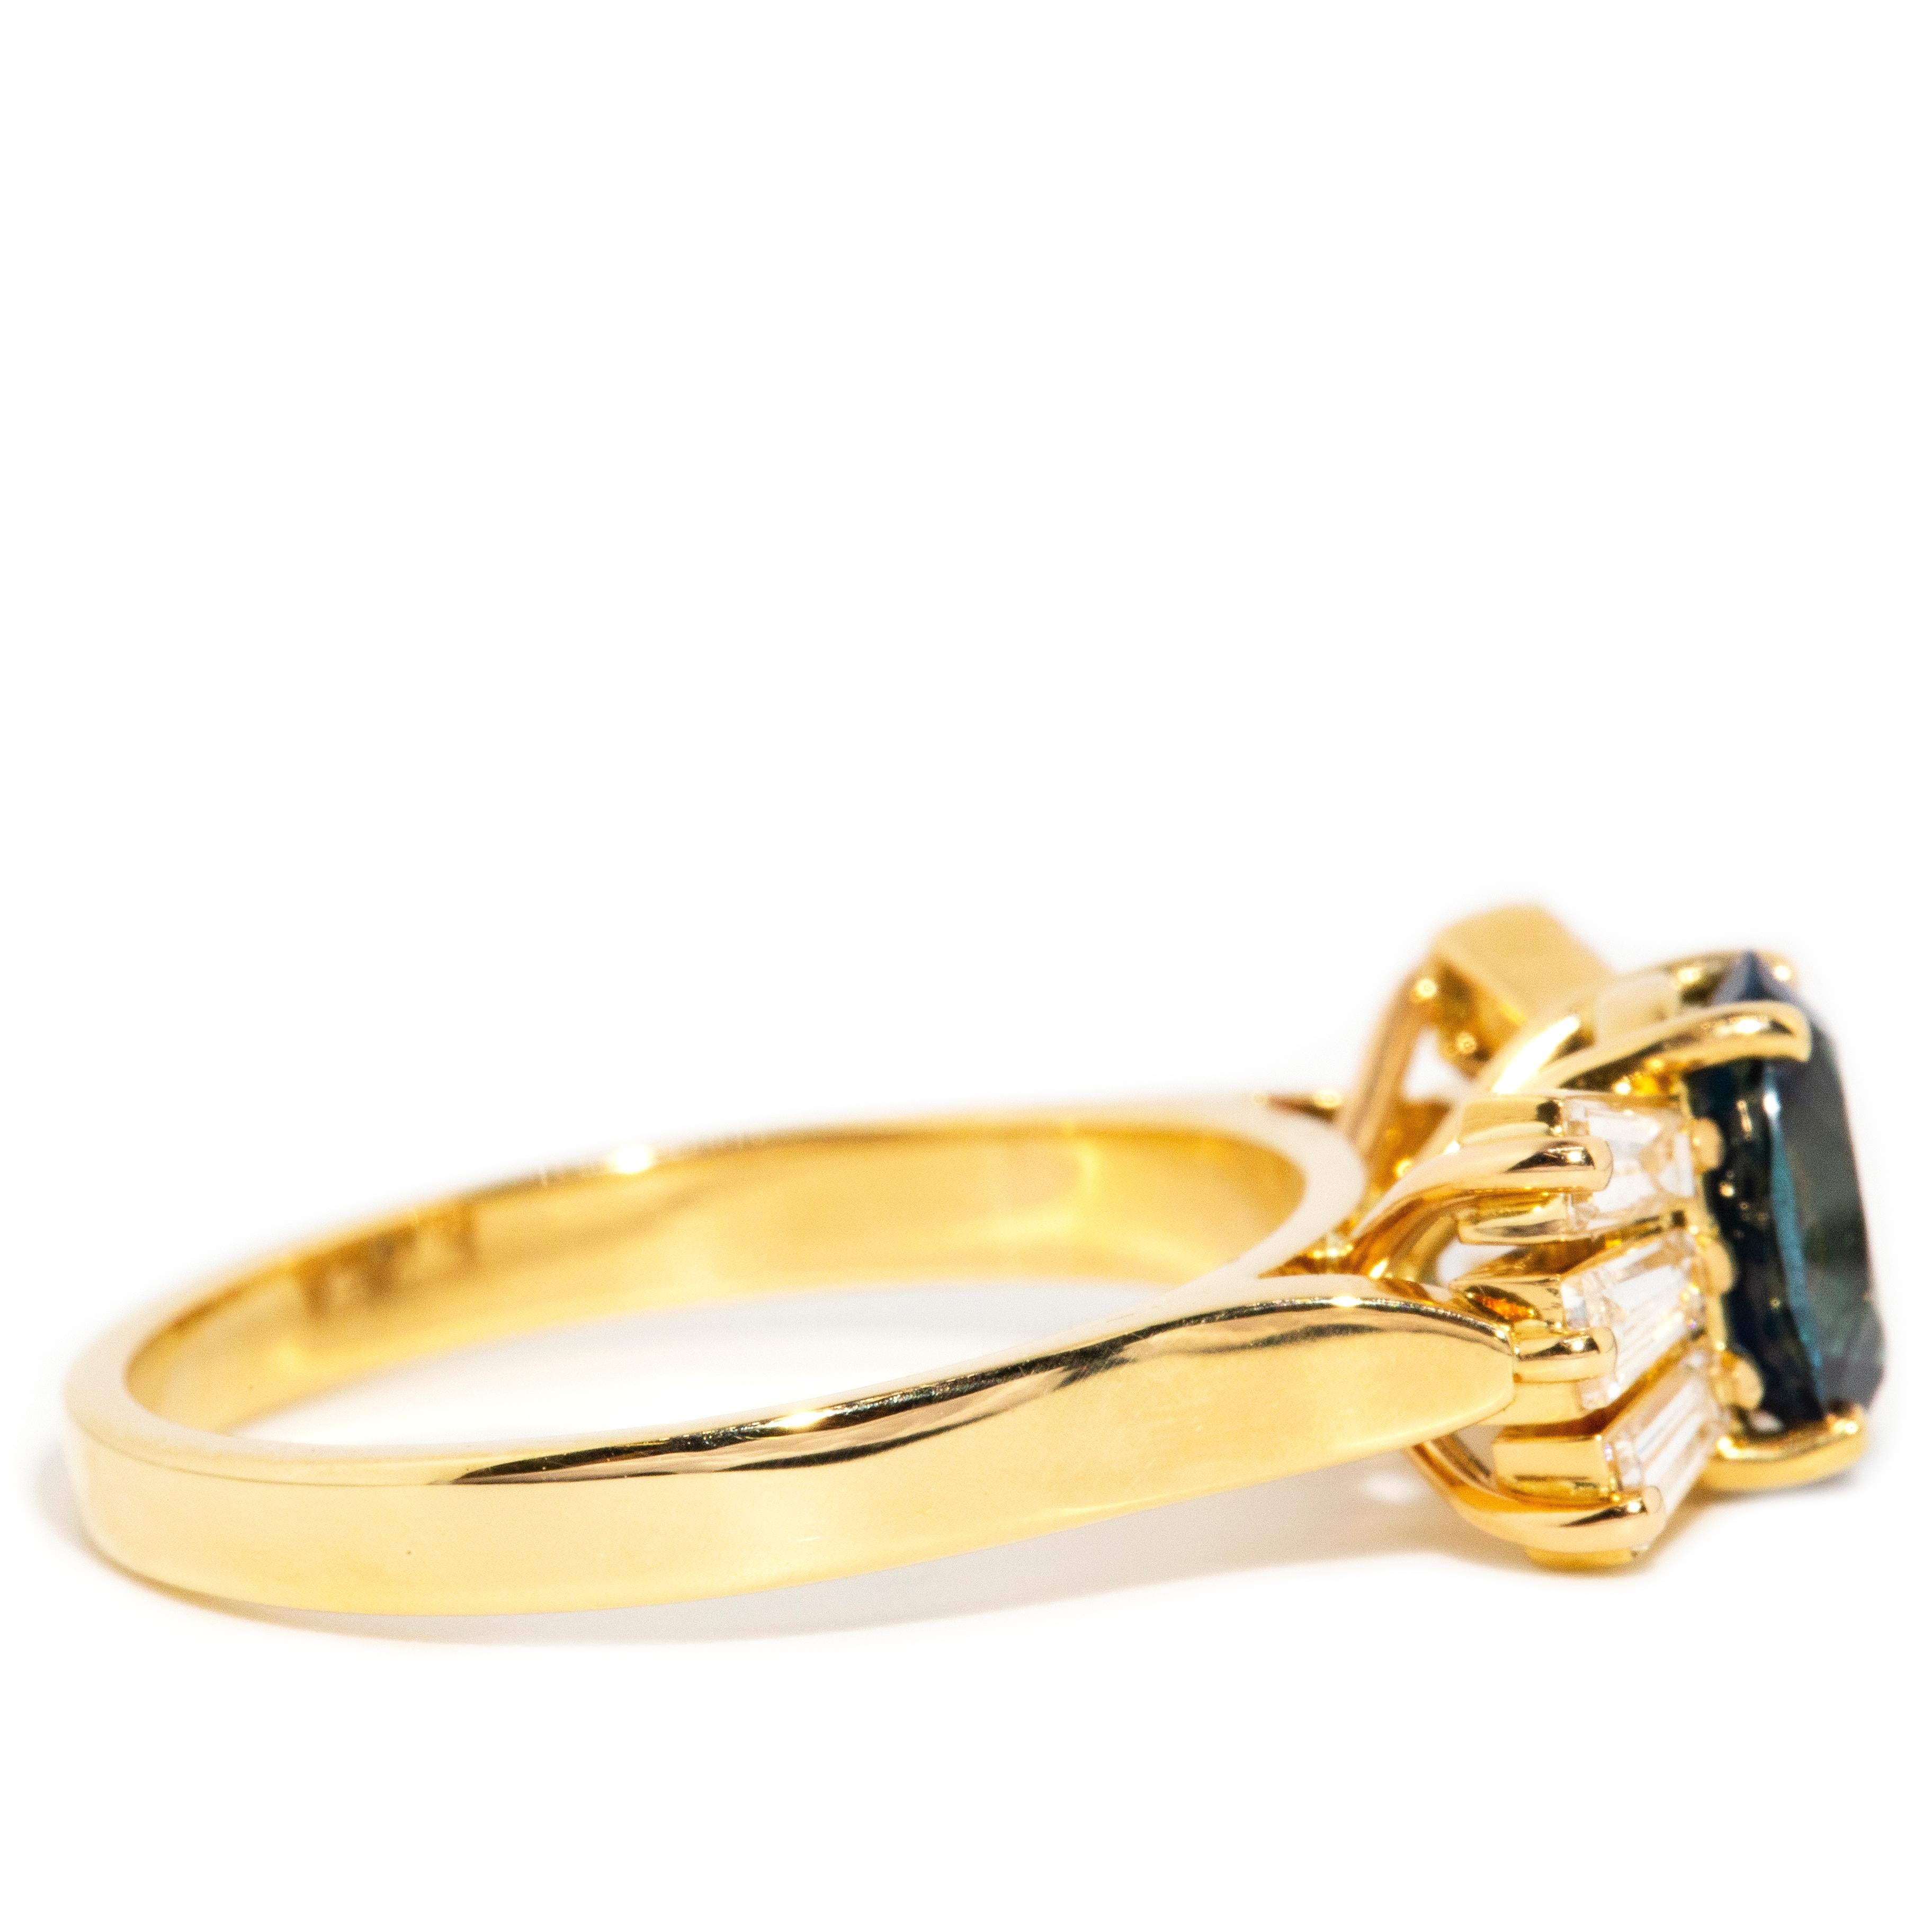 Vintage Circa 1980s 1.78 Carat Sapphire & Baguette Diamond Ring 18ct Yellow Gold For Sale 4